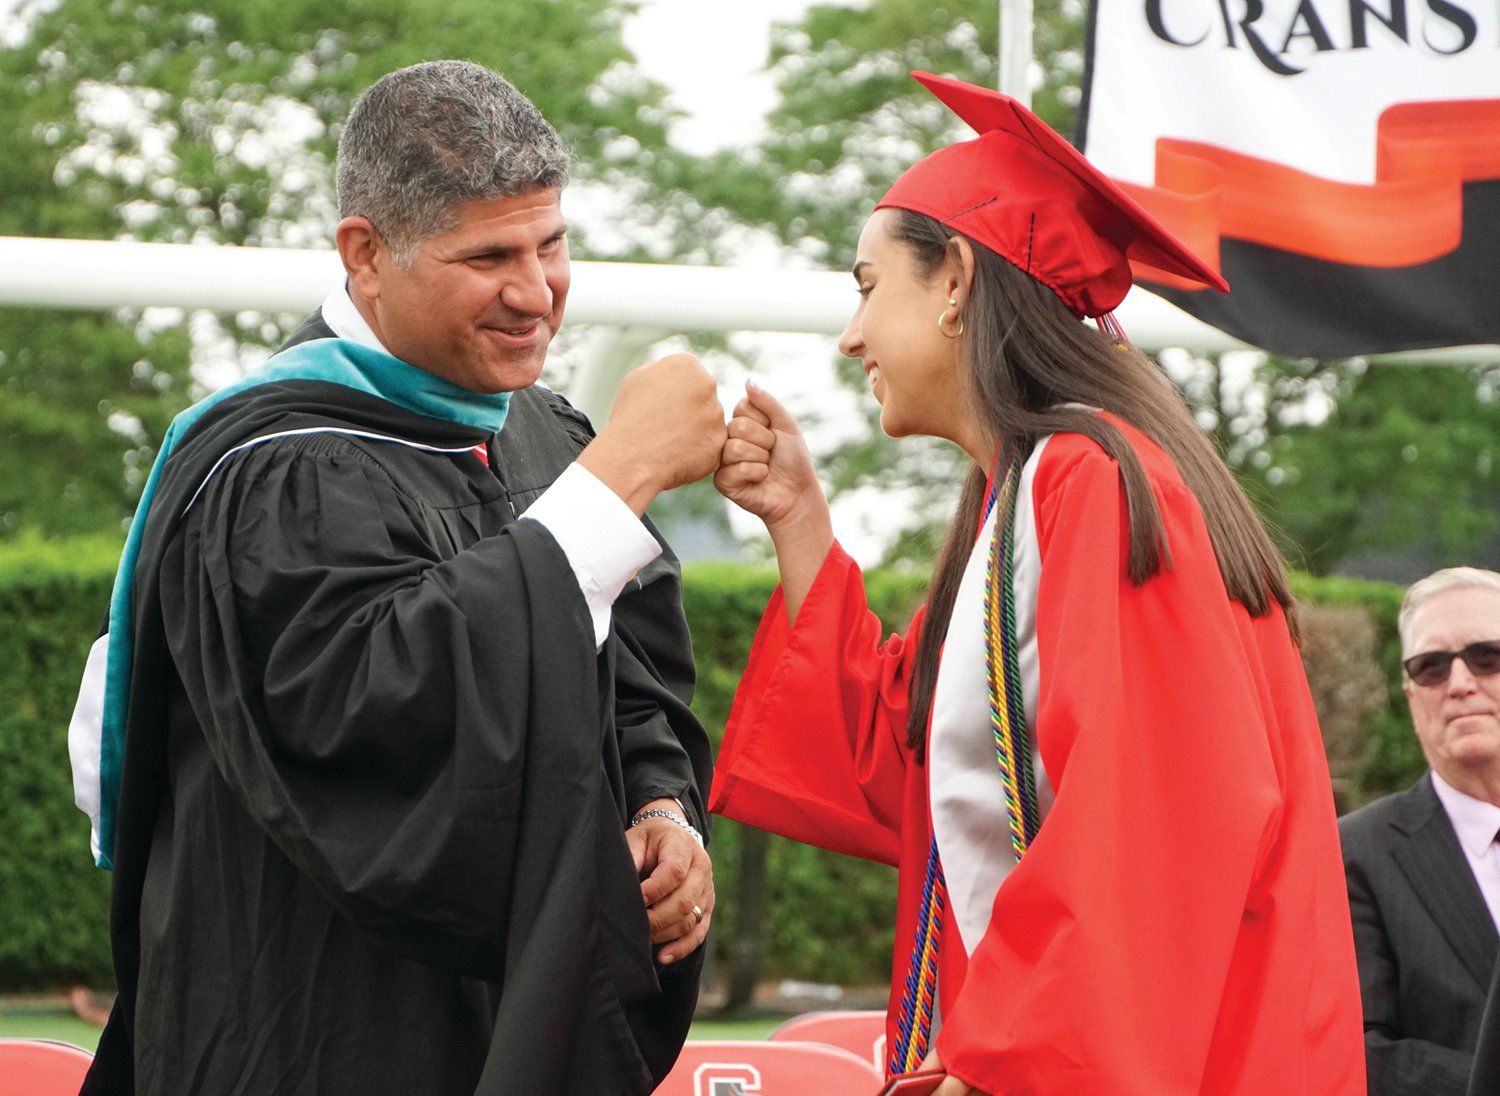 FALCONS SOAR: Above, Cranston West class of 2021 salutatorian and Ideal Cranstonian Catherine Consiglio fist bumps with Principal Thomas Barbieri after receiving her diploma at Saturday’s graduation ceremony.